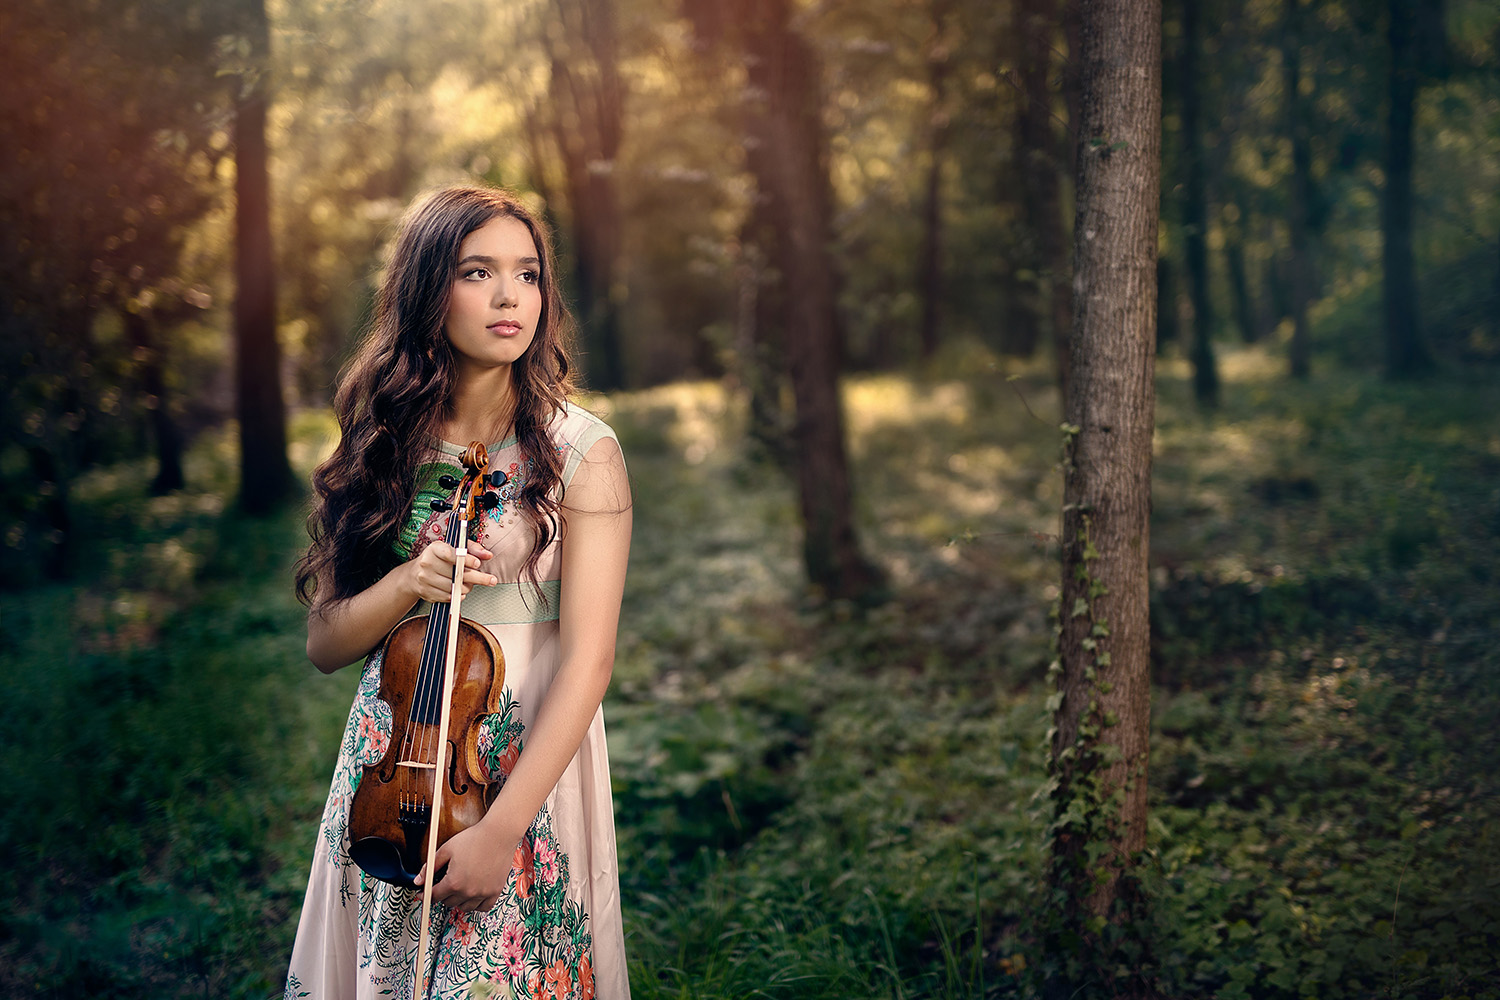 A woman with long dark hair holding a violin and standing in the woods